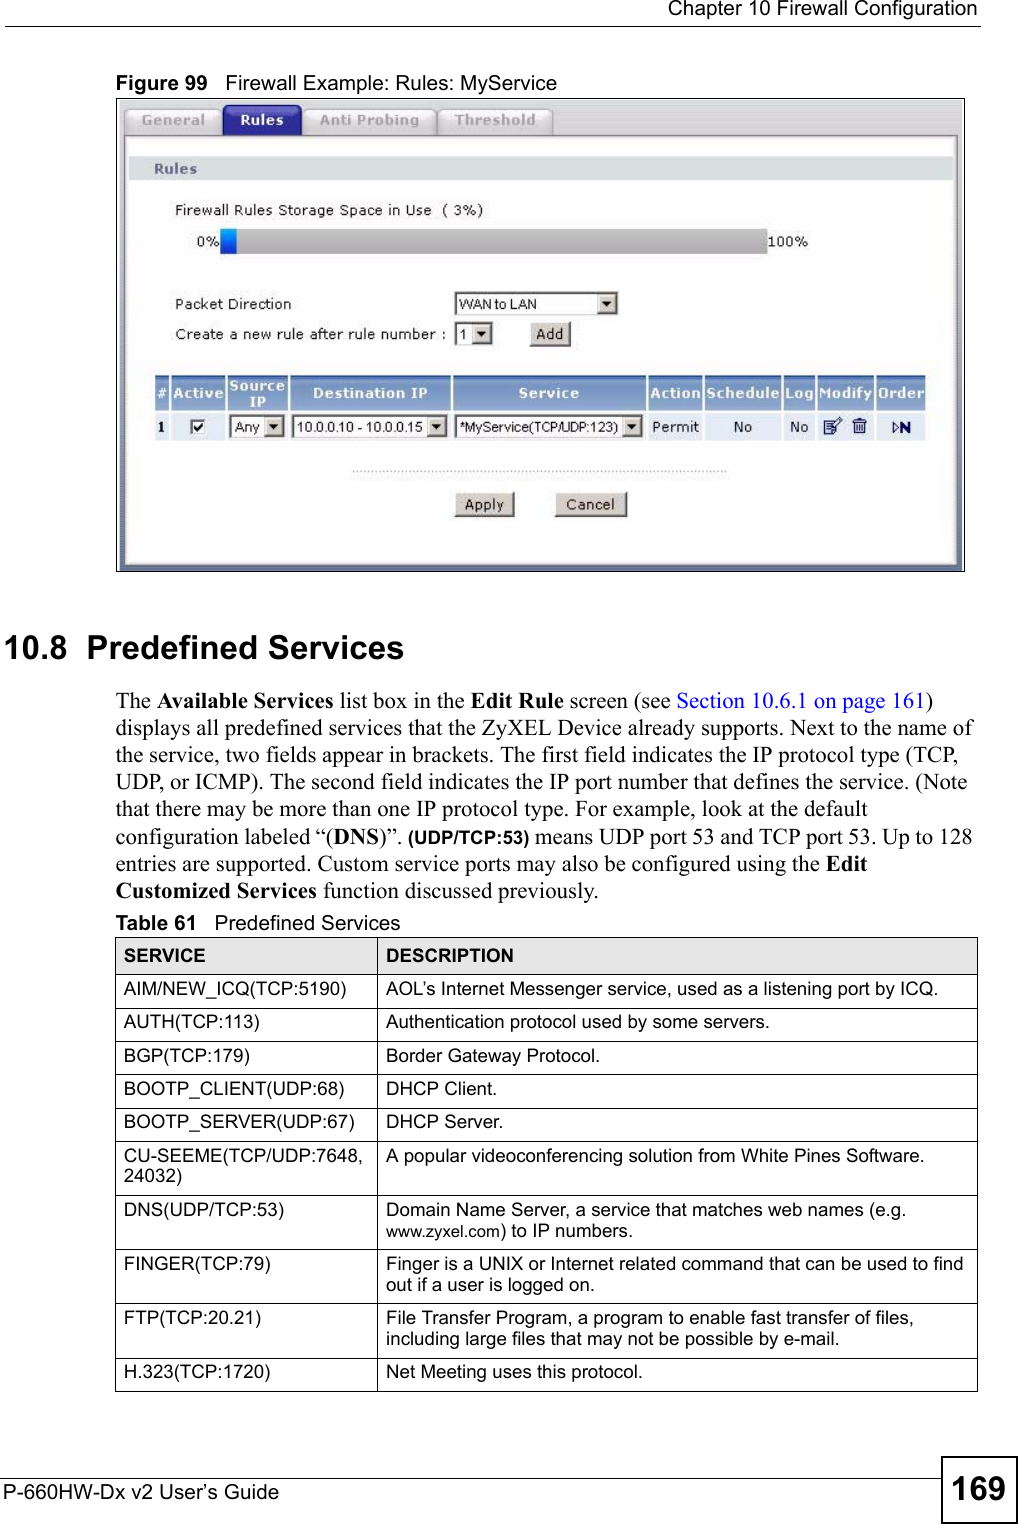  Chapter 10 Firewall ConfigurationP-660HW-Dx v2 User’s Guide 169Figure 99   Firewall Example: Rules: MyService 10.8  Predefined ServicesThe Available Services list box in the Edit Rule screen (see Section 10.6.1 on page 161) displays all predefined services that the ZyXEL Device already supports. Next to the name of the service, two fields appear in brackets. The first field indicates the IP protocol type (TCP, UDP, or ICMP). The second field indicates the IP port number that defines the service. (Note that there may be more than one IP protocol type. For example, look at the default configuration labeled “(DNS)”. (UDP/TCP:53) means UDP port 53 and TCP port 53. Up to 128 entries are supported. Custom service ports may also be configured using the Edit Customized Services function discussed previously.Table 61   Predefined ServicesSERVICE DESCRIPTIONAIM/NEW_ICQ(TCP:5190) AOL’s Internet Messenger service, used as a listening port by ICQ.AUTH(TCP:113) Authentication protocol used by some servers.BGP(TCP:179)  Border Gateway Protocol.BOOTP_CLIENT(UDP:68)  DHCP Client.BOOTP_SERVER(UDP:67)  DHCP Server.CU-SEEME(TCP/UDP:7648, 24032) A popular videoconferencing solution from White Pines Software.DNS(UDP/TCP:53)  Domain Name Server, a service that matches web names (e.g. www.zyxel.com) to IP numbers.FINGER(TCP:79)  Finger is a UNIX or Internet related command that can be used to find out if a user is logged on.FTP(TCP:20.21)  File Transfer Program, a program to enable fast transfer of files, including large files that may not be possible by e-mail.H.323(TCP:1720) Net Meeting uses this protocol.